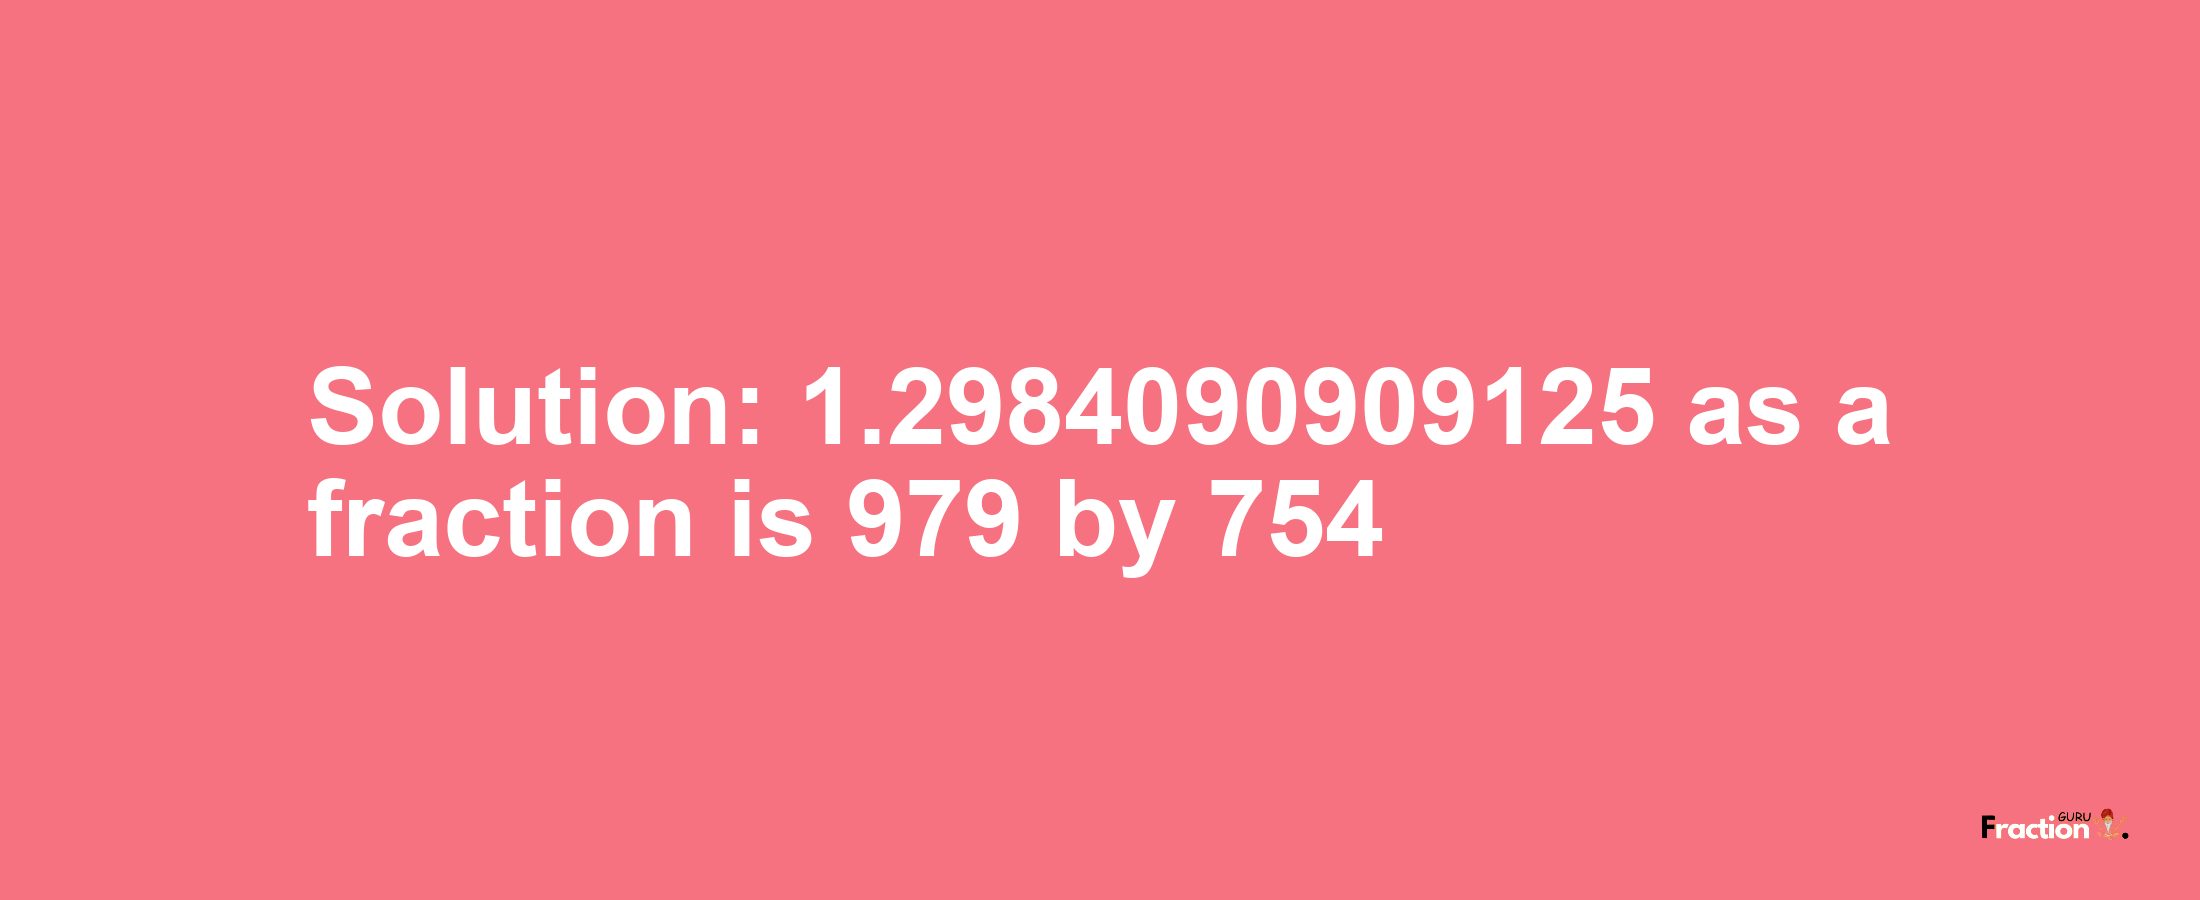 Solution:1.2984090909125 as a fraction is 979/754